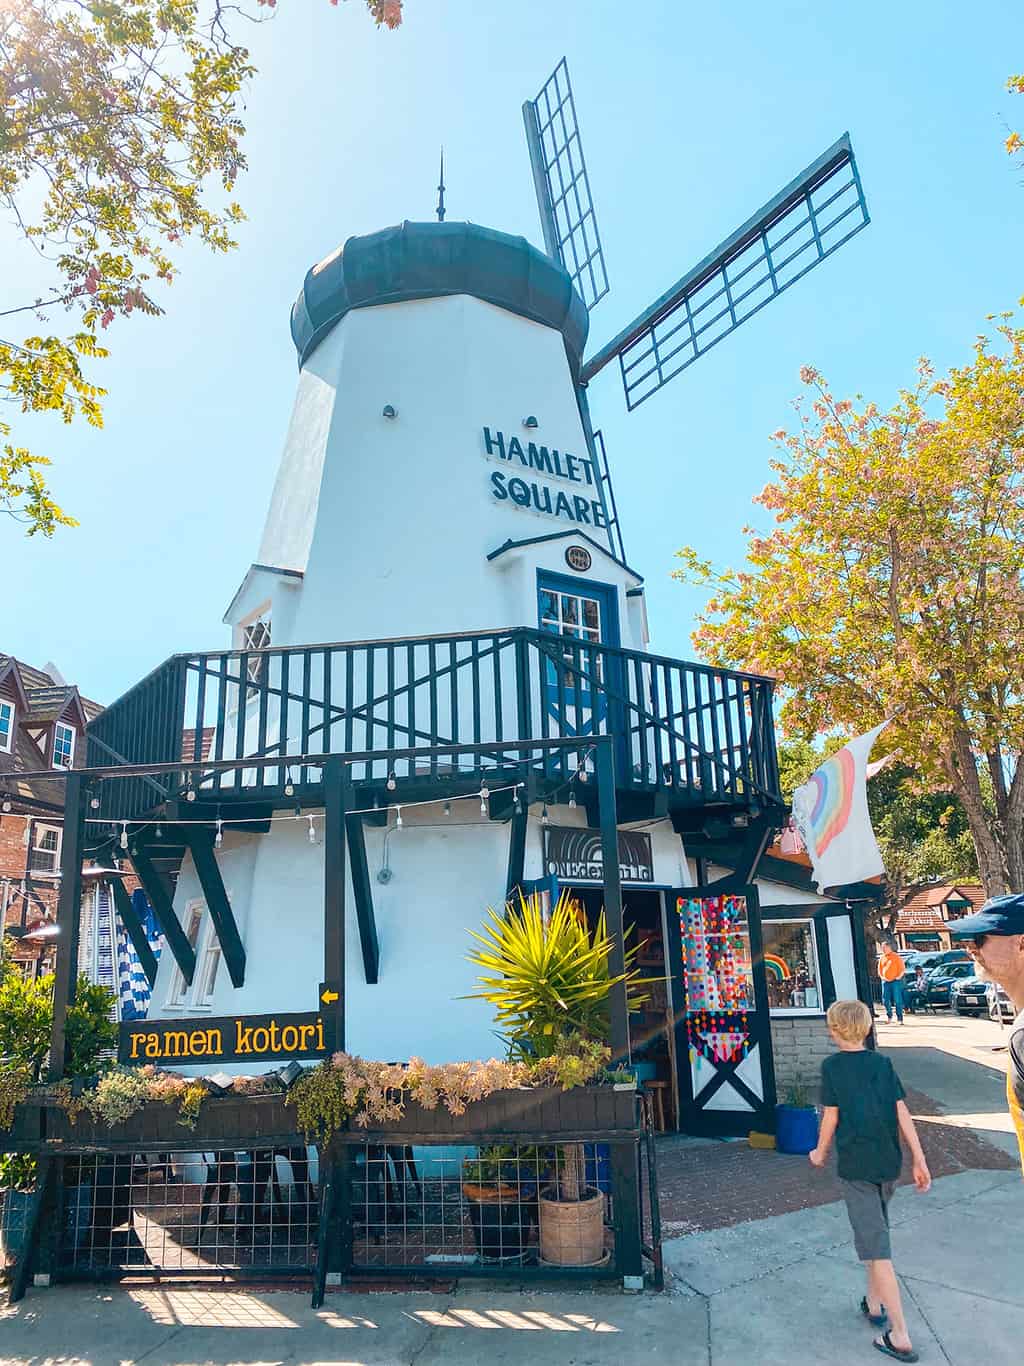 Hamlet Square Windmill in Solvang CA - credit Keryn Means of Twist Travel Magazine